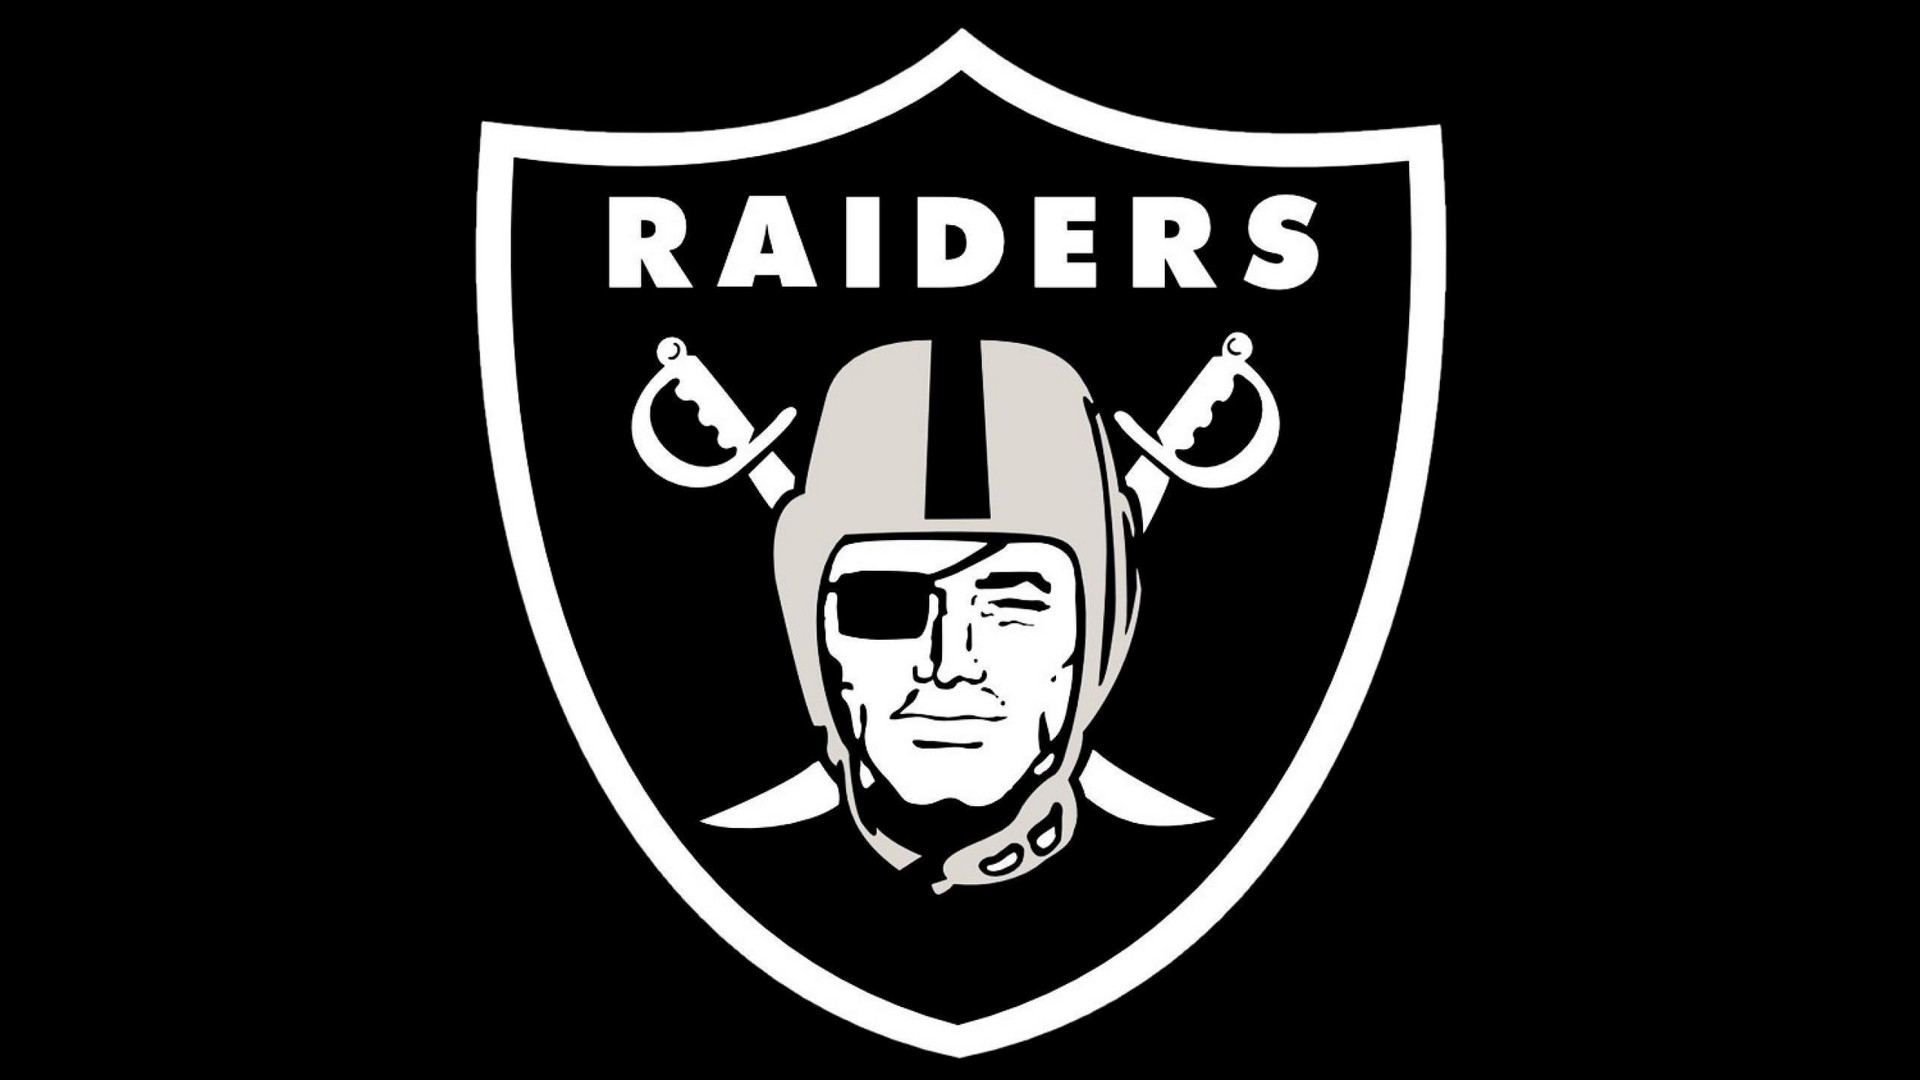 Oakland Raiders Desktop Wallpaper With high-resolution 1920X1080 pixel. You can use this wallpaper for your Mac or Windows Desktop Background, iPhone, Android or Tablet and another Smartphone device